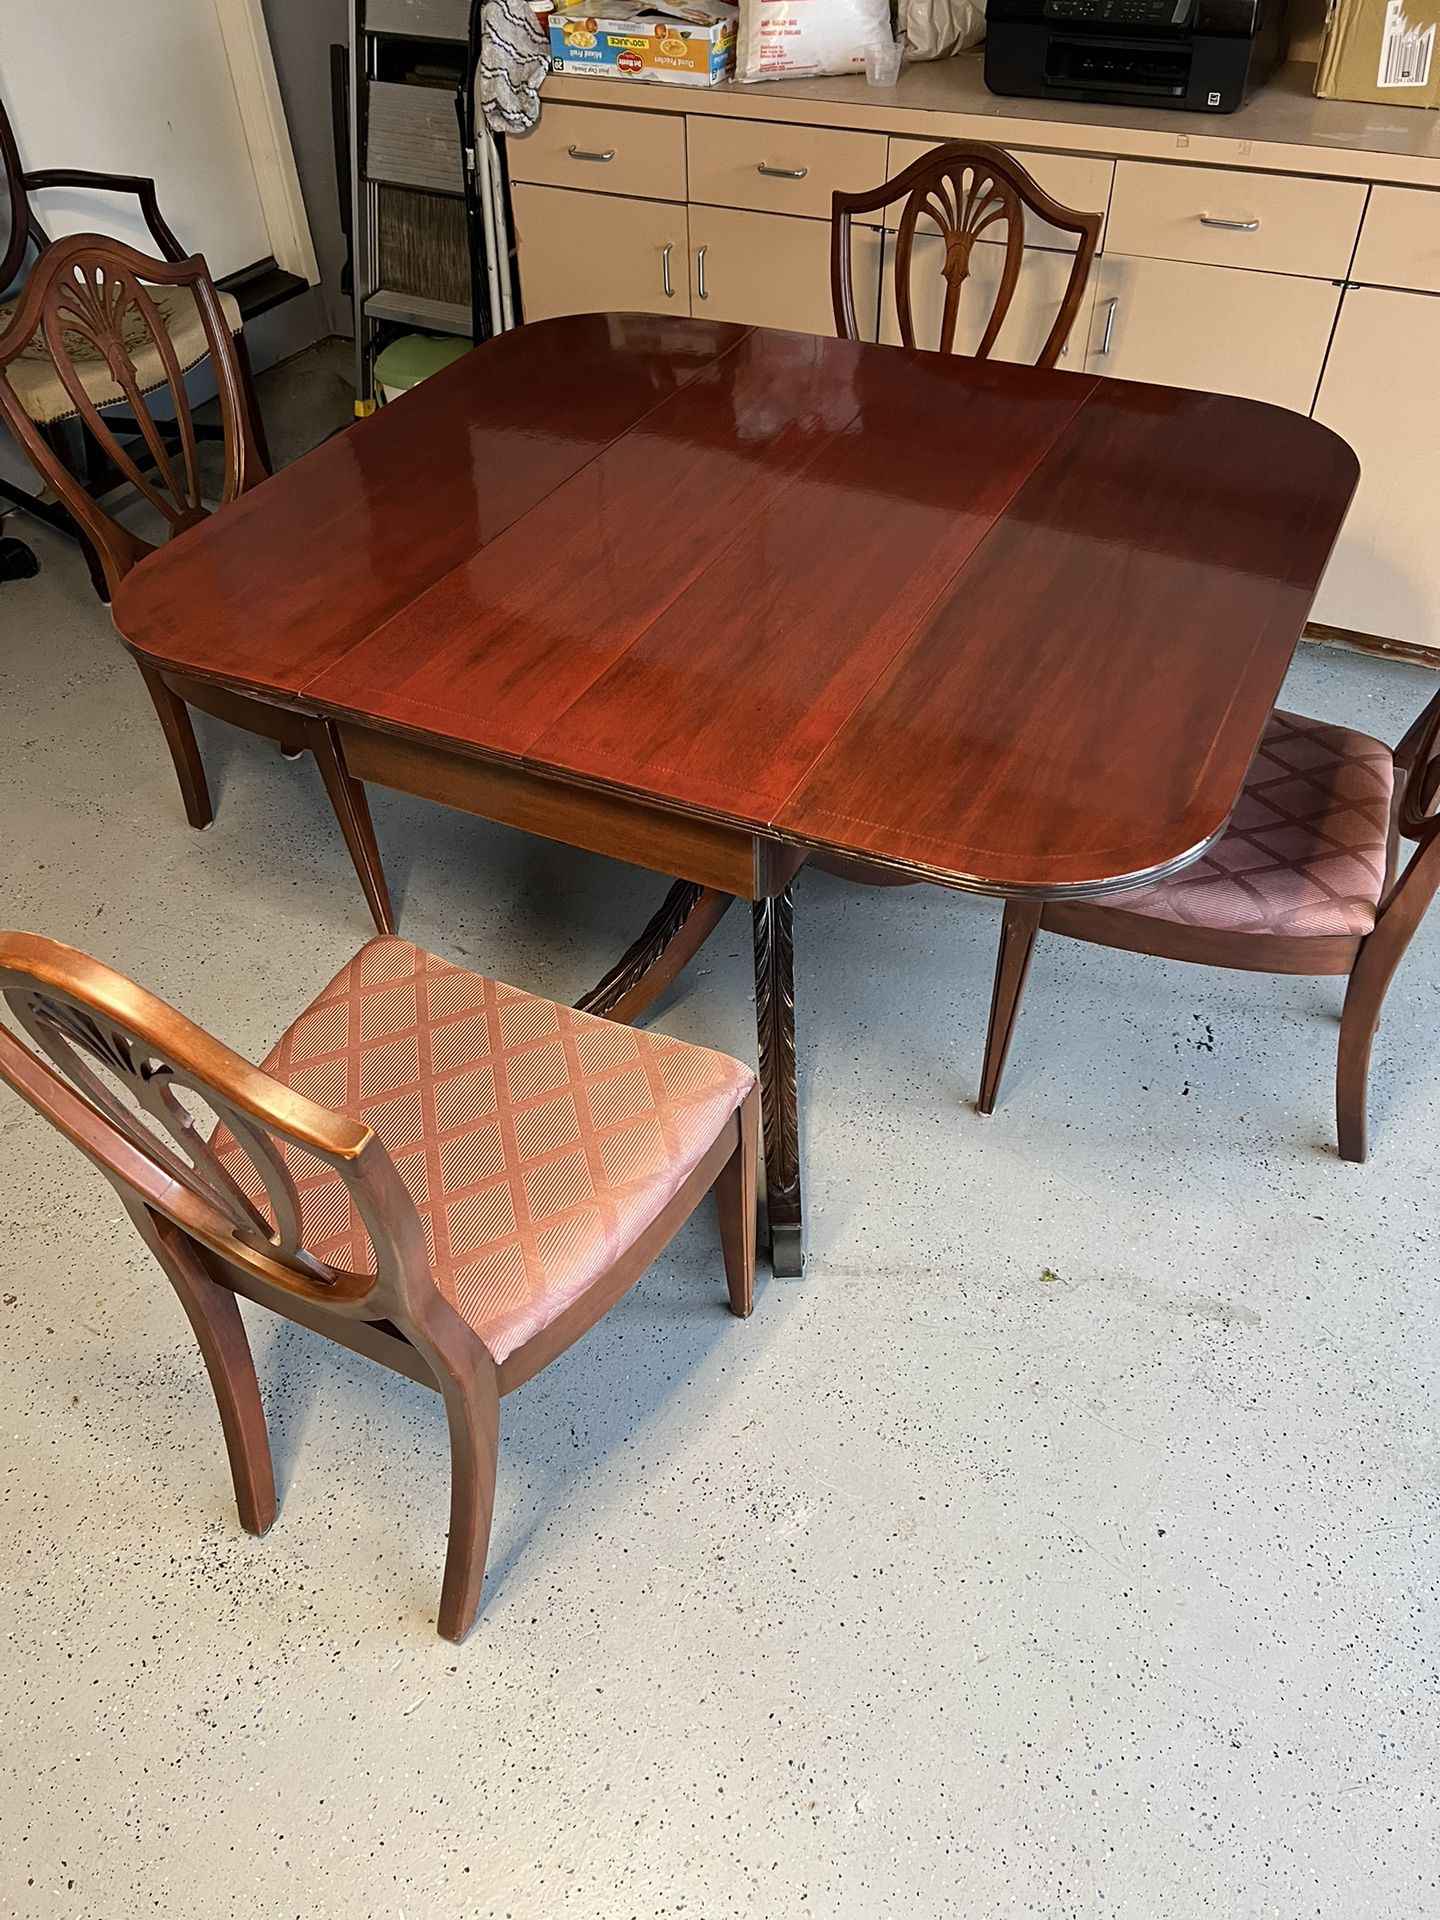 Antique Table with Chairs 